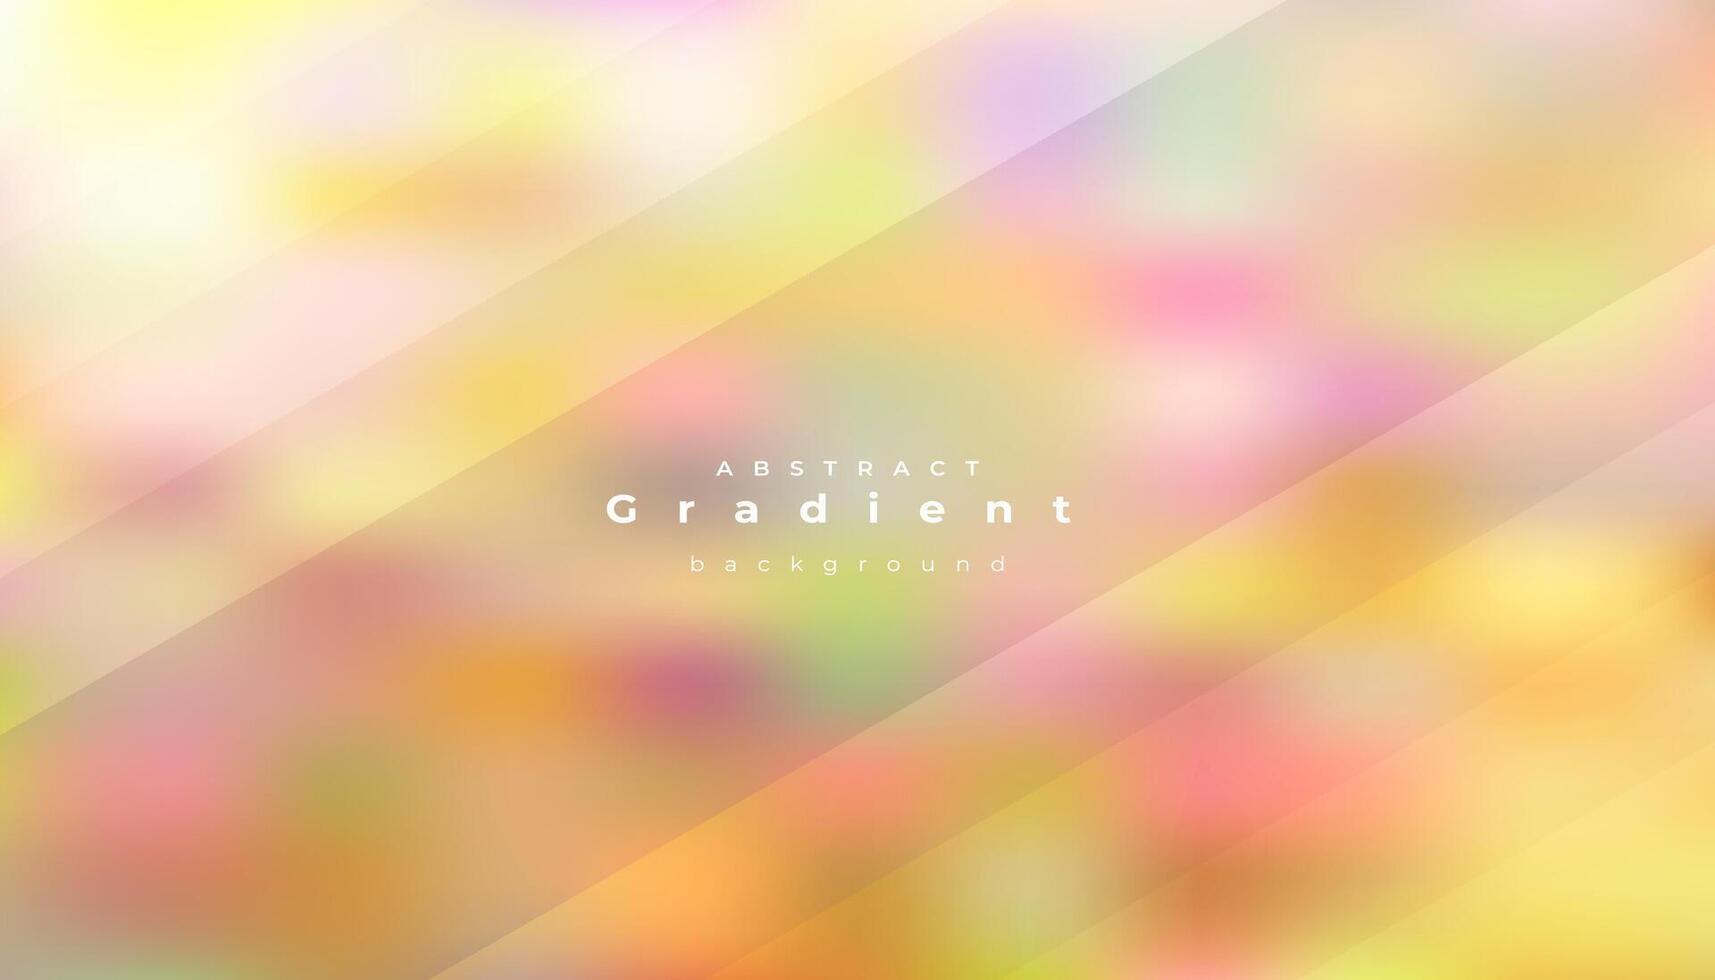 Abstract Gradient Template vector